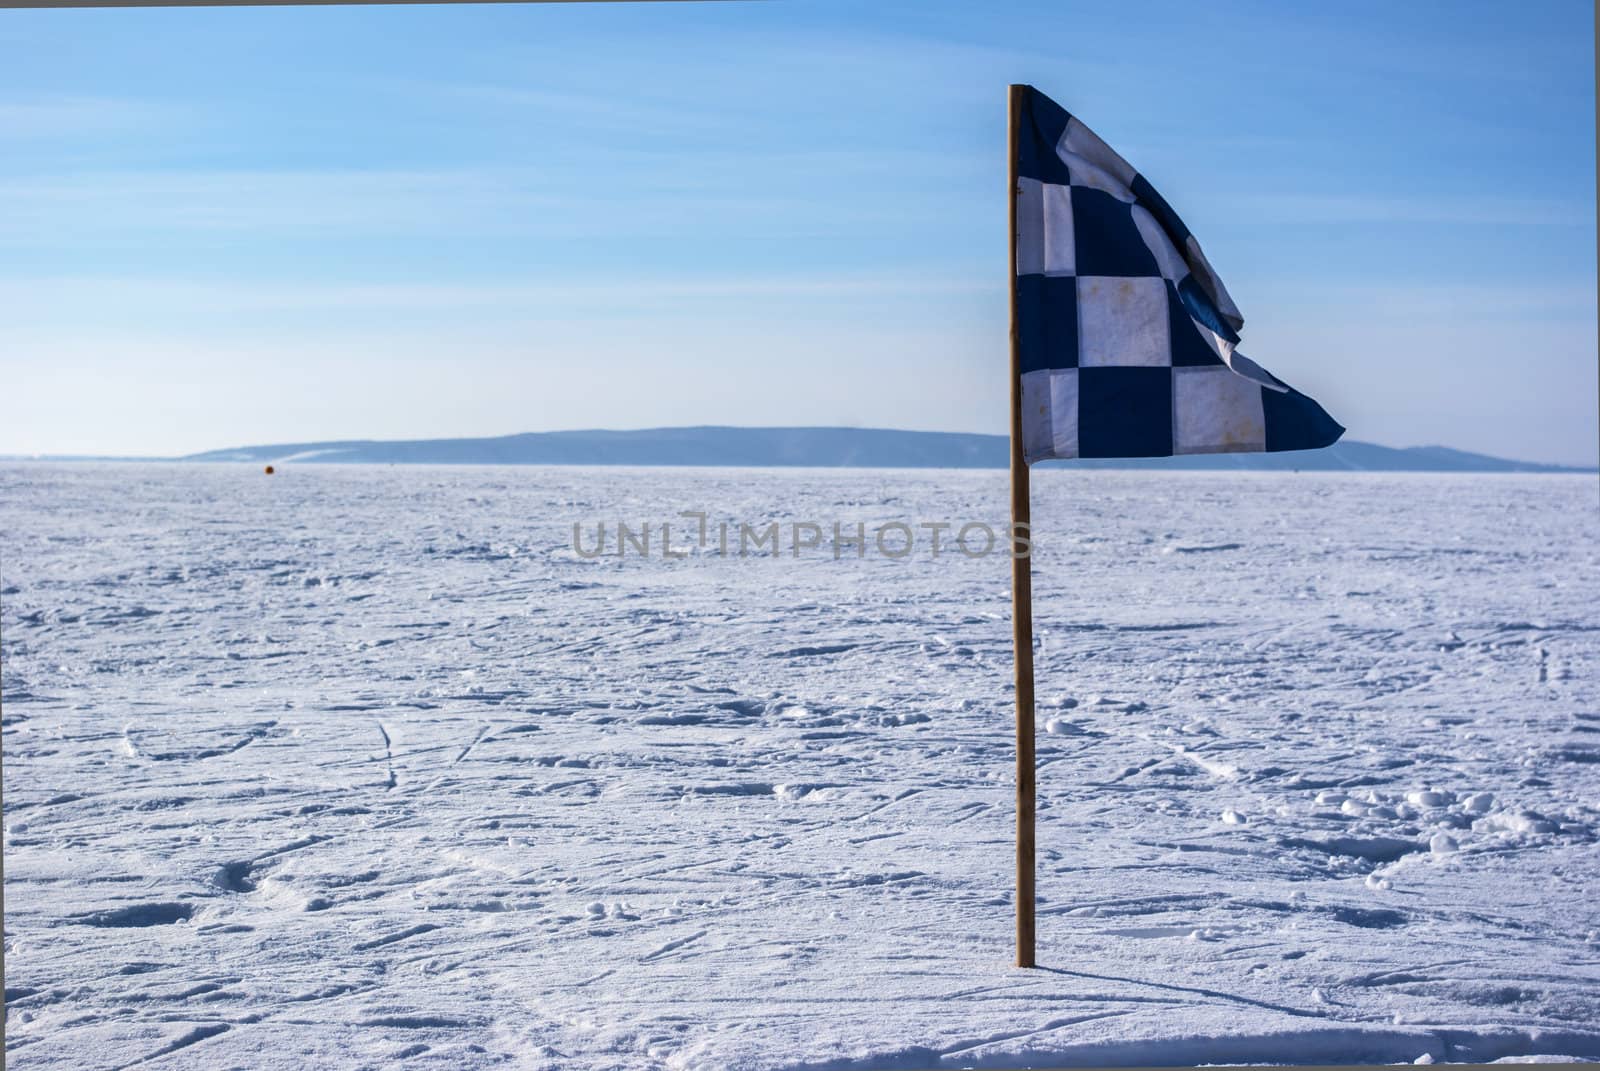  snowy field of sports with a flag